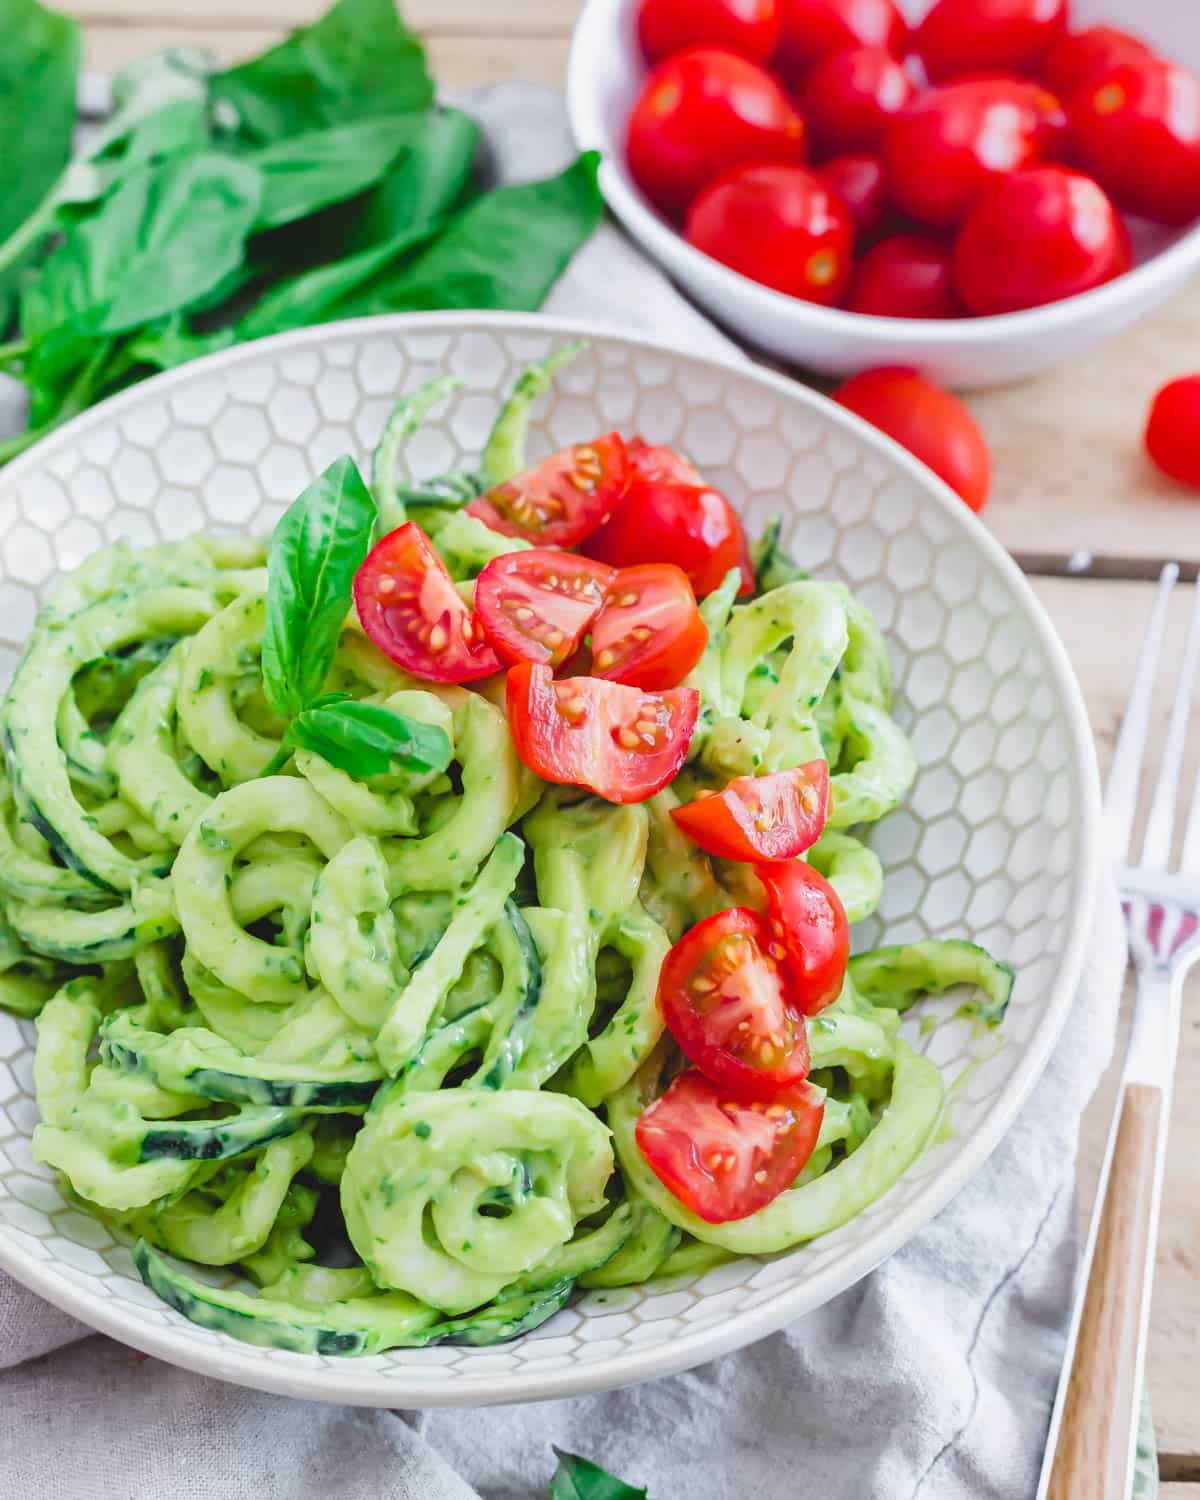 Zucchini noodles with pesto and tomatoes in a white bowl.